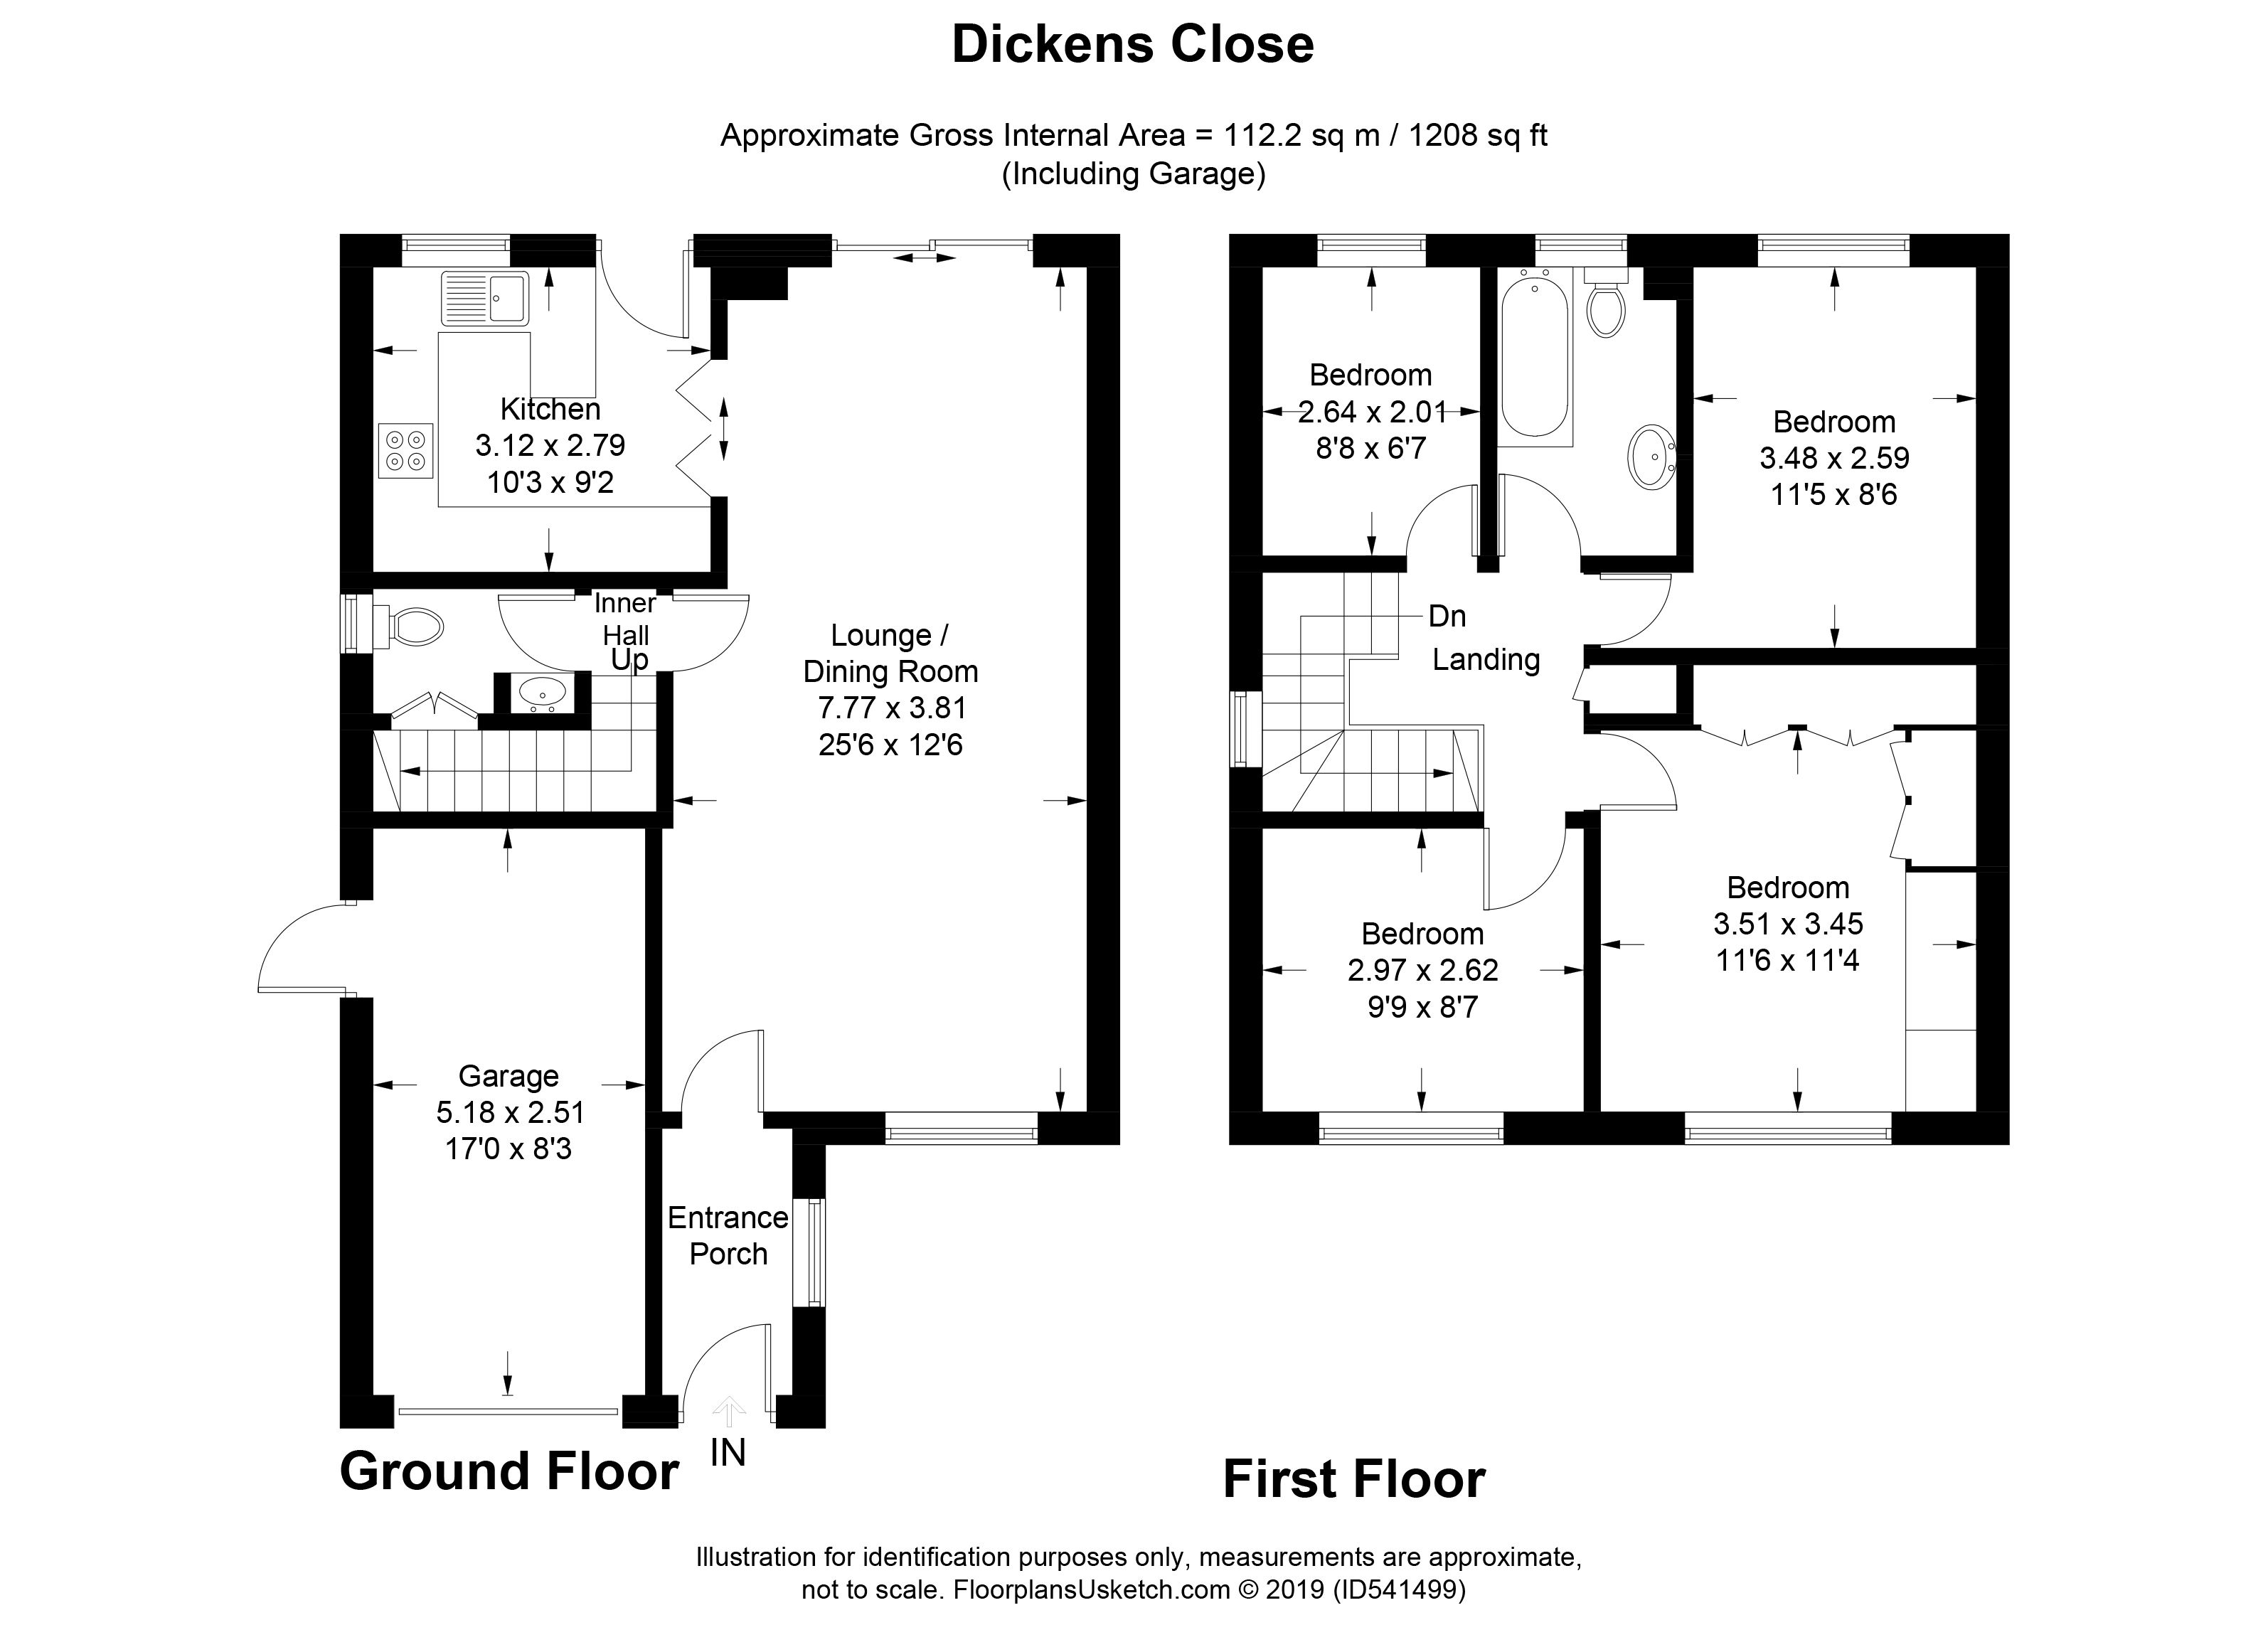 4 Bedrooms Semi-detached house for sale in Dickens Close, Cheshunt, Waltham Cross EN7